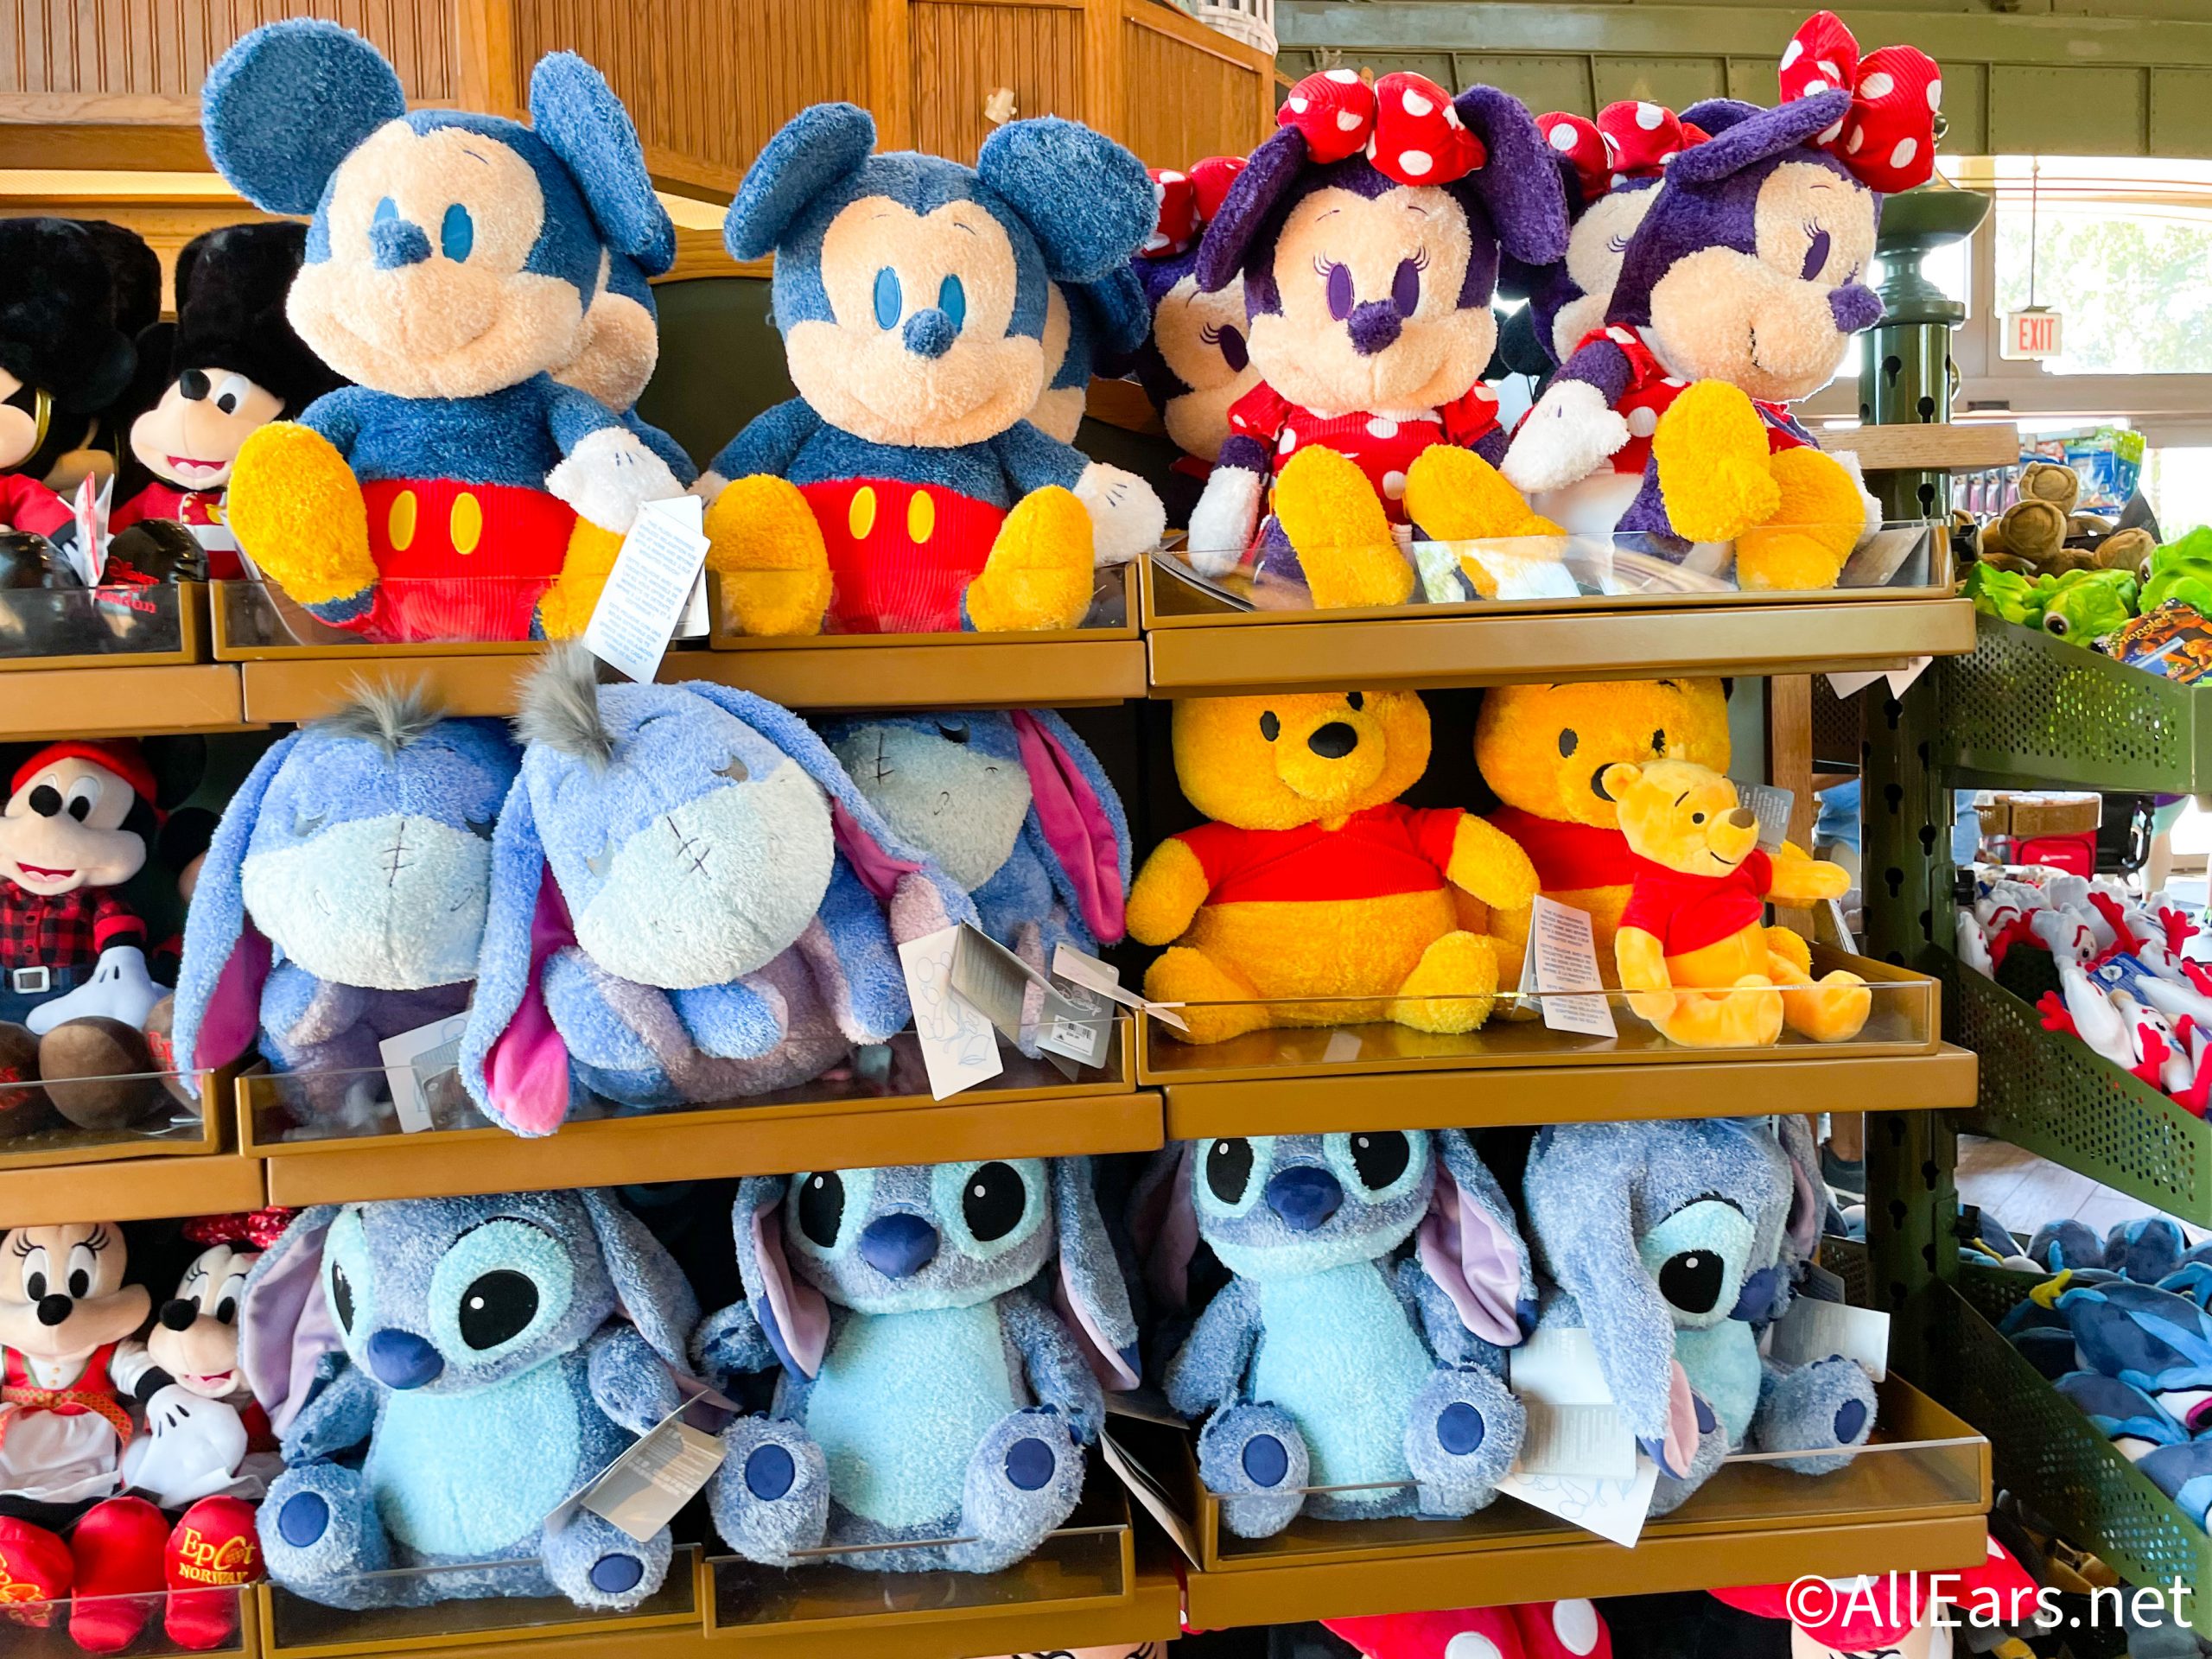 Is Your Favorite Disney Character Now a Weighted Plush? Find Out Here! -  AllEars.Net